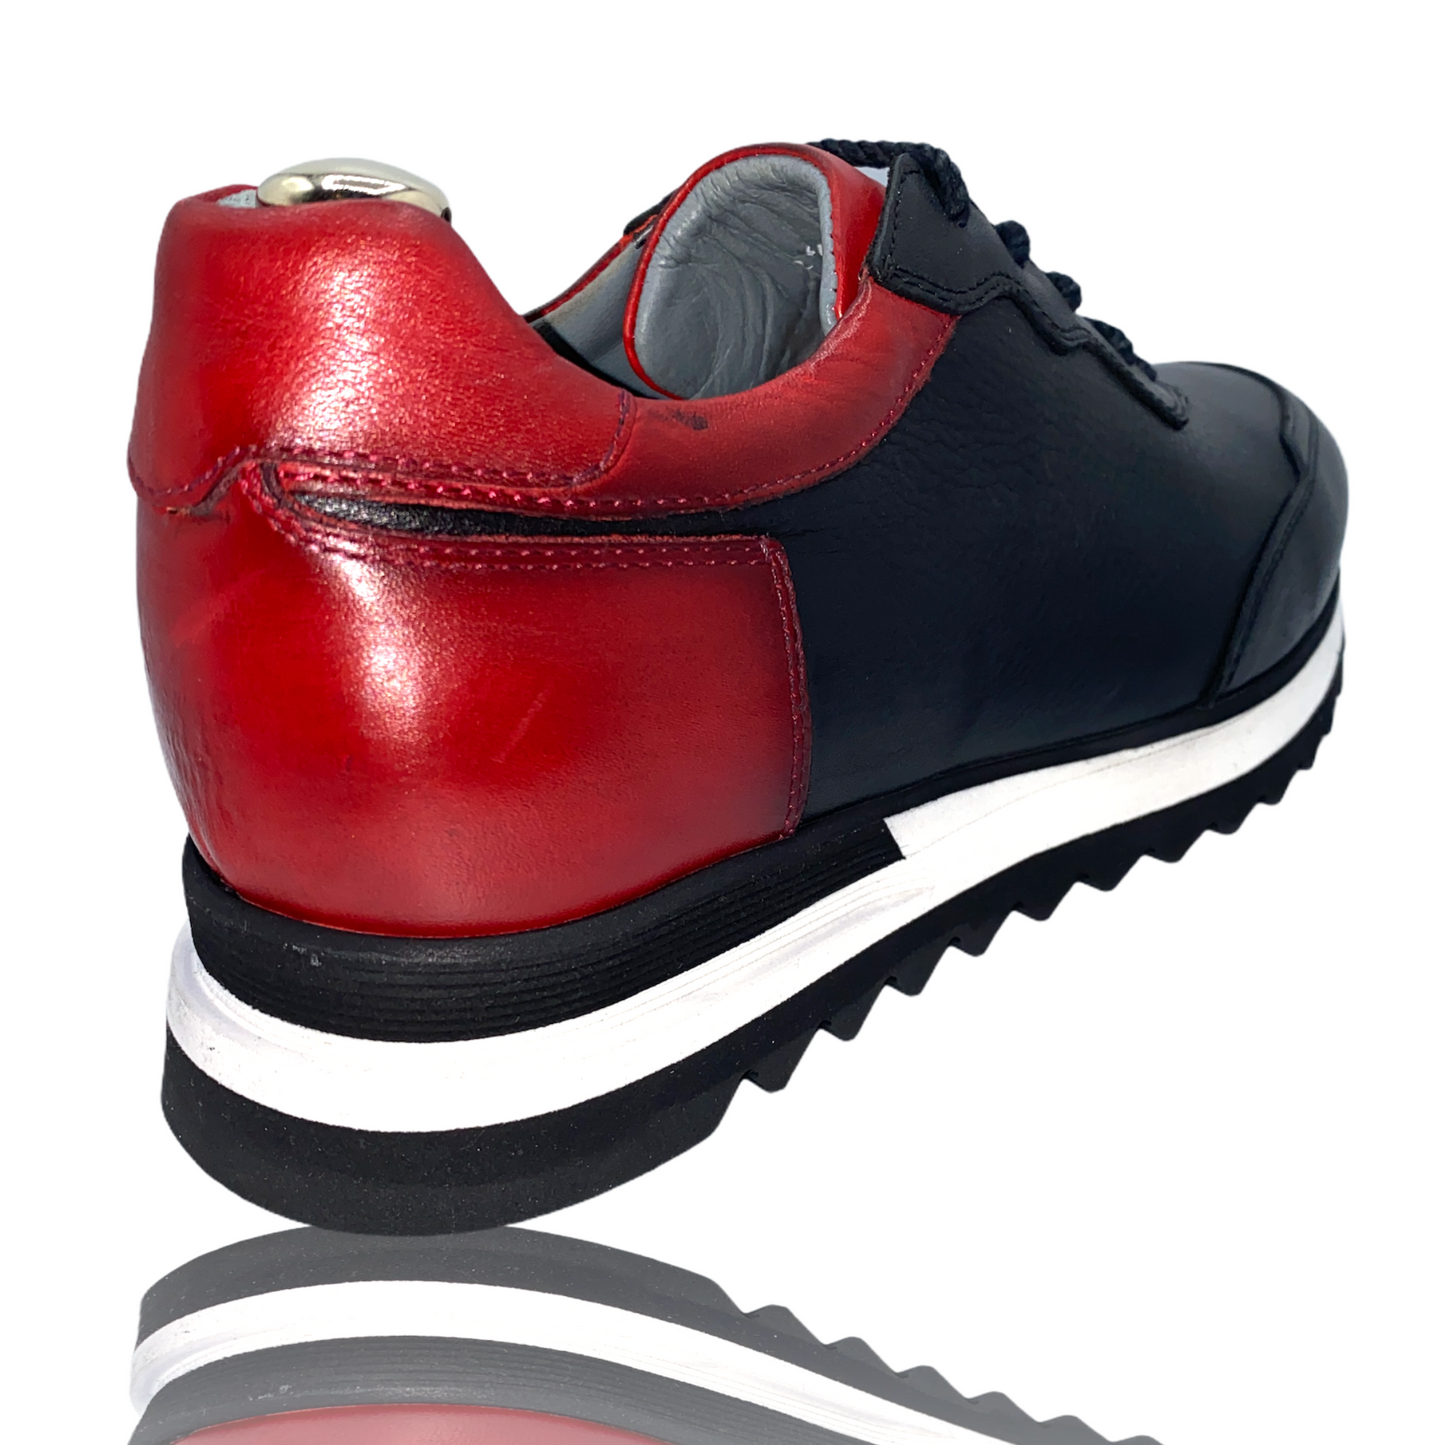 The Florida Black Leather Sneaker Final Sale!